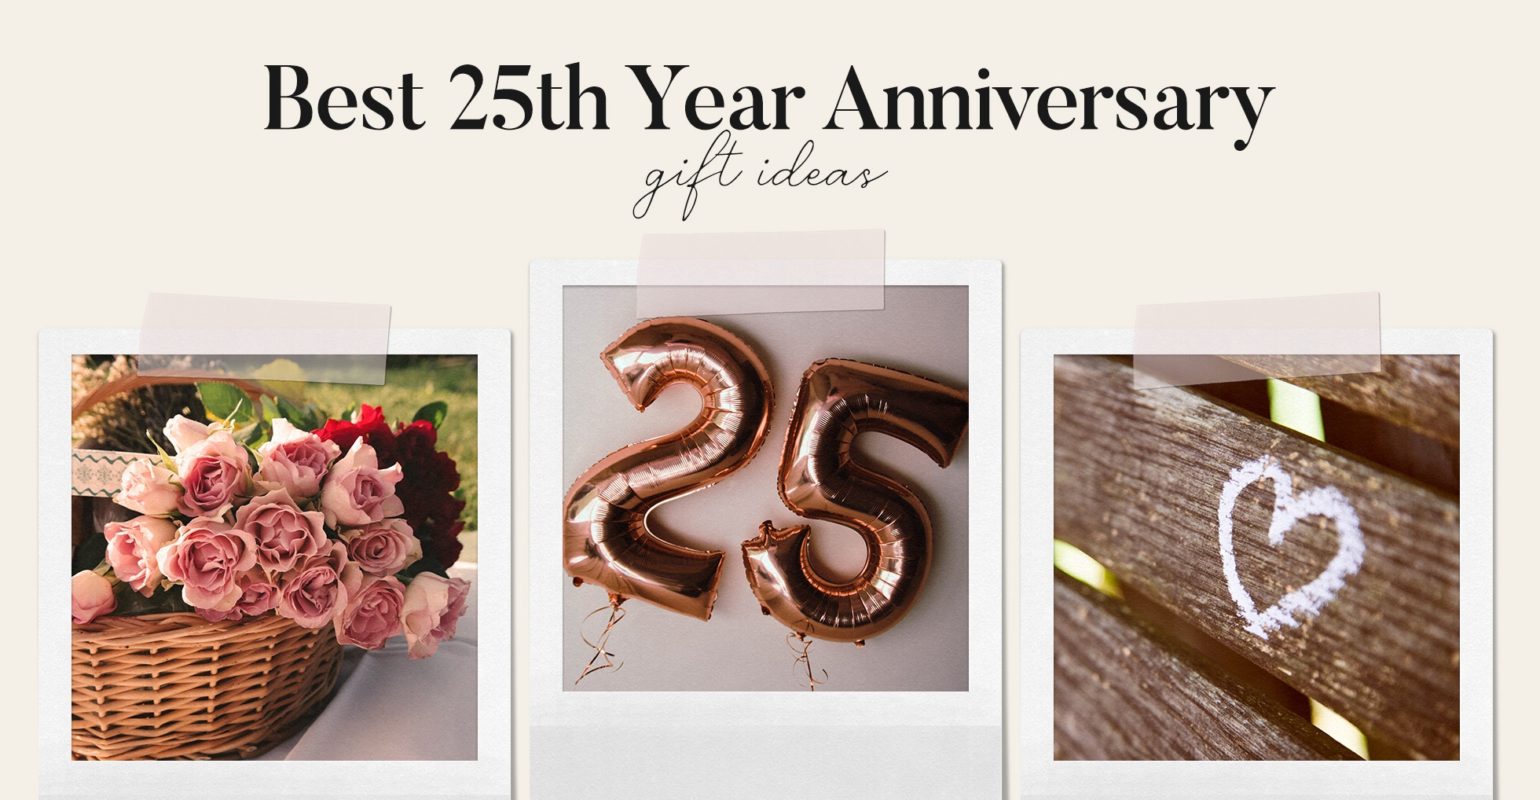 7 Silver Gifts to Choose for a 25th Year Anniversary Gift